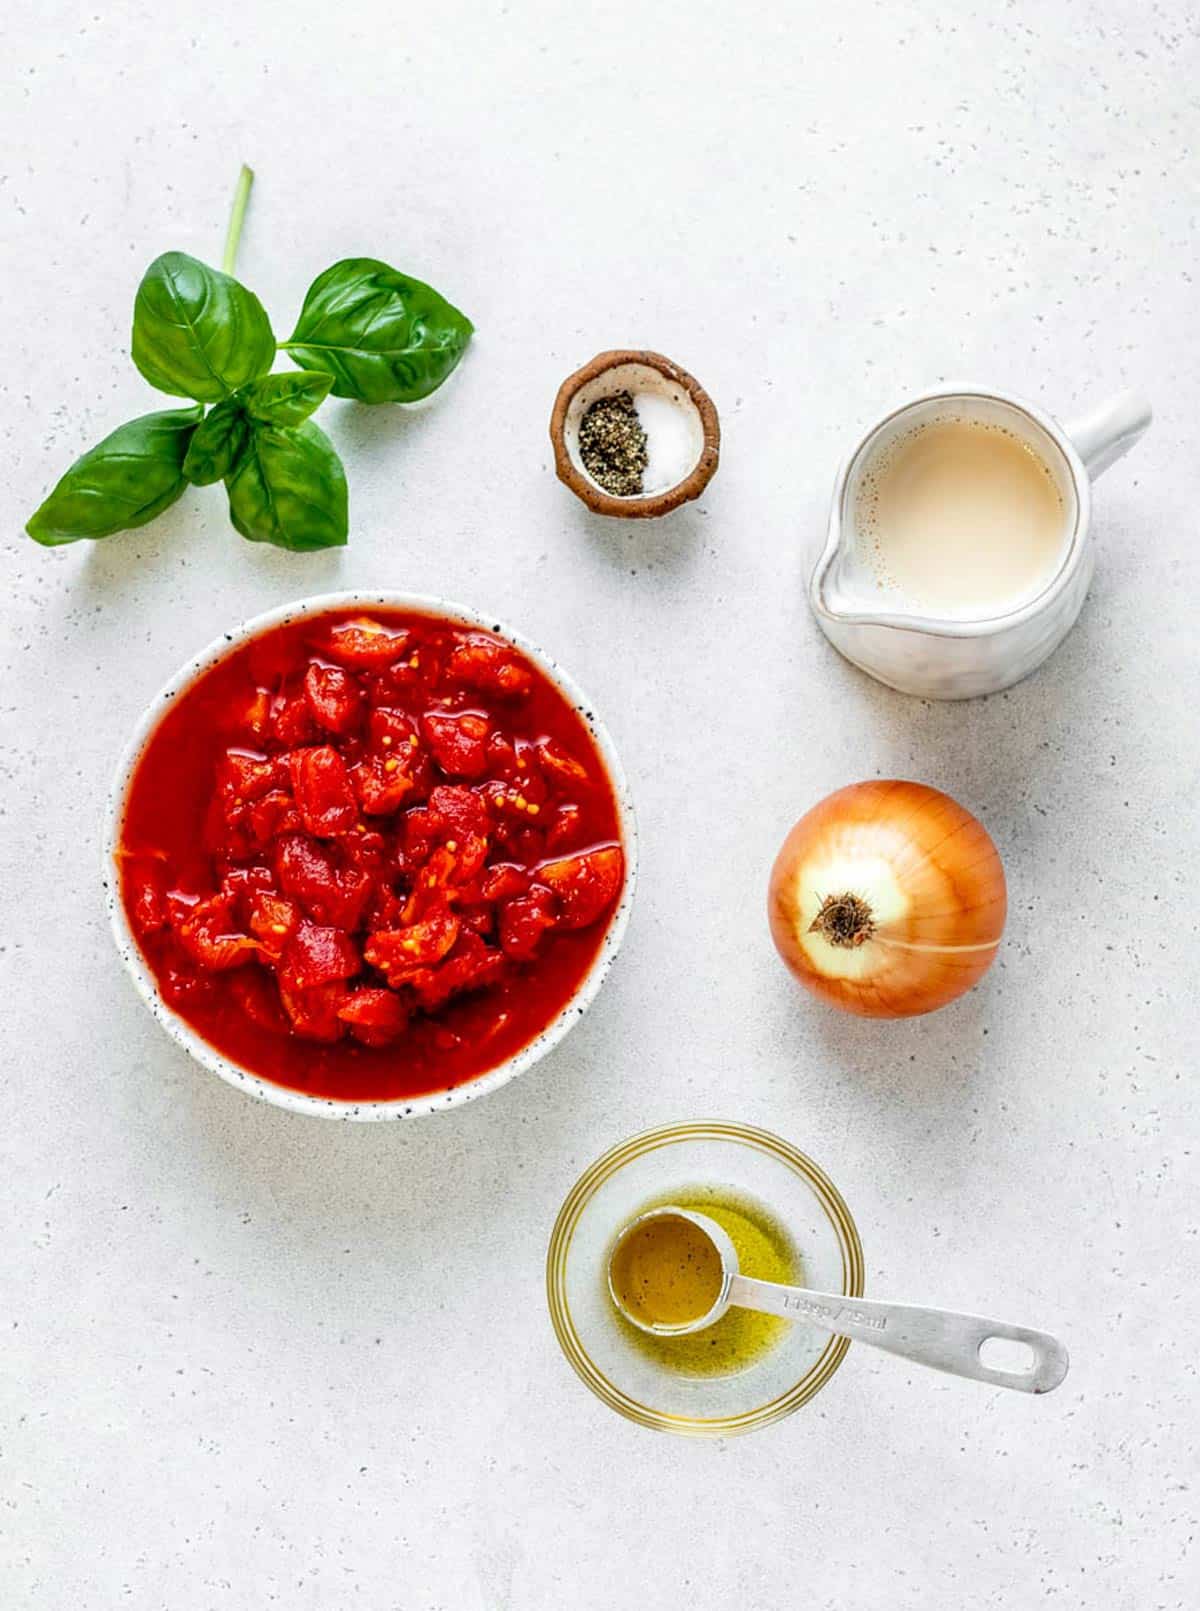 The ingredients for homemade tomato soup, including fresh basil, salt and pepper, evaporated milk, diced tomatoes, onion and olive oil.